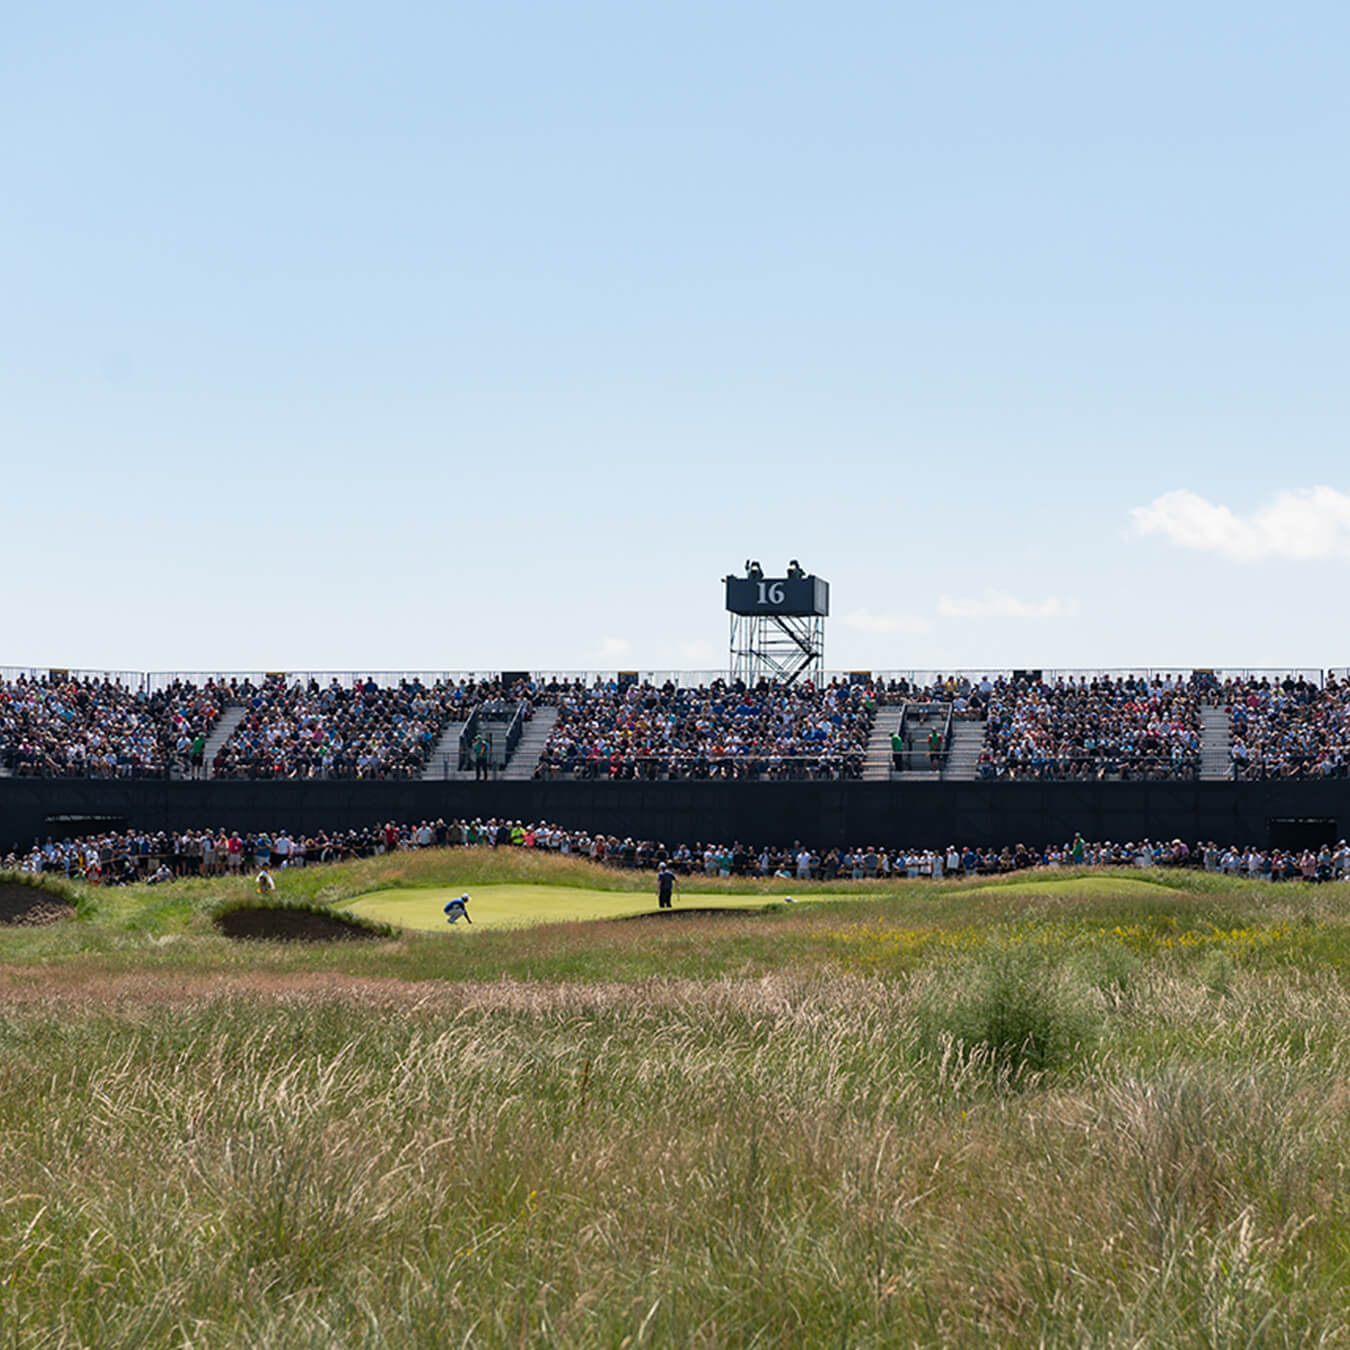 Rolex US Open golf landscape with spectator stands